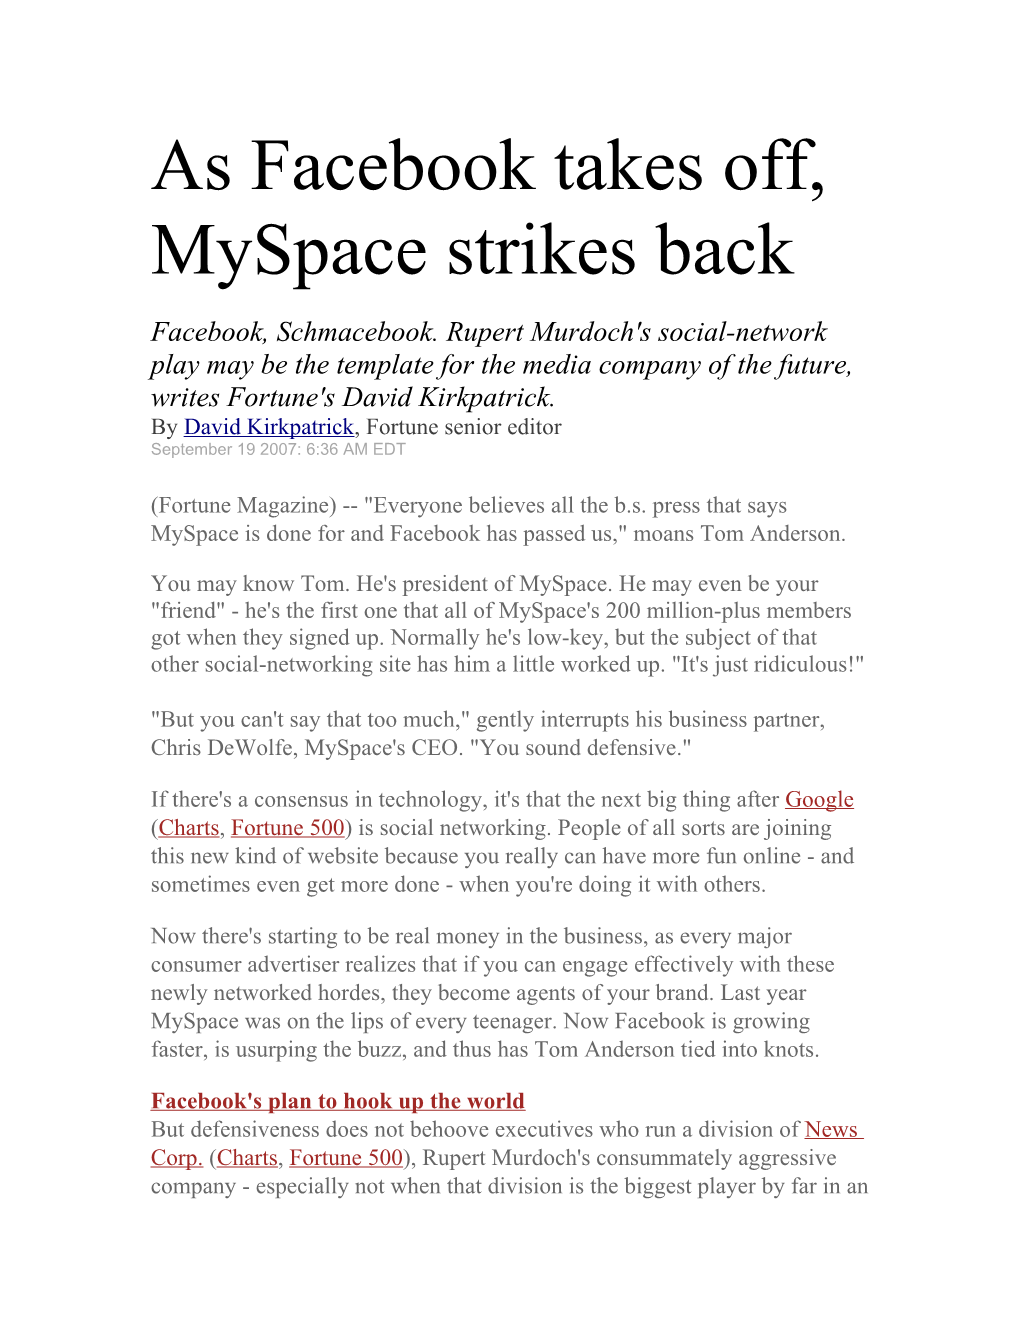 As Facebook Takes Off, Myspace Strikes Back